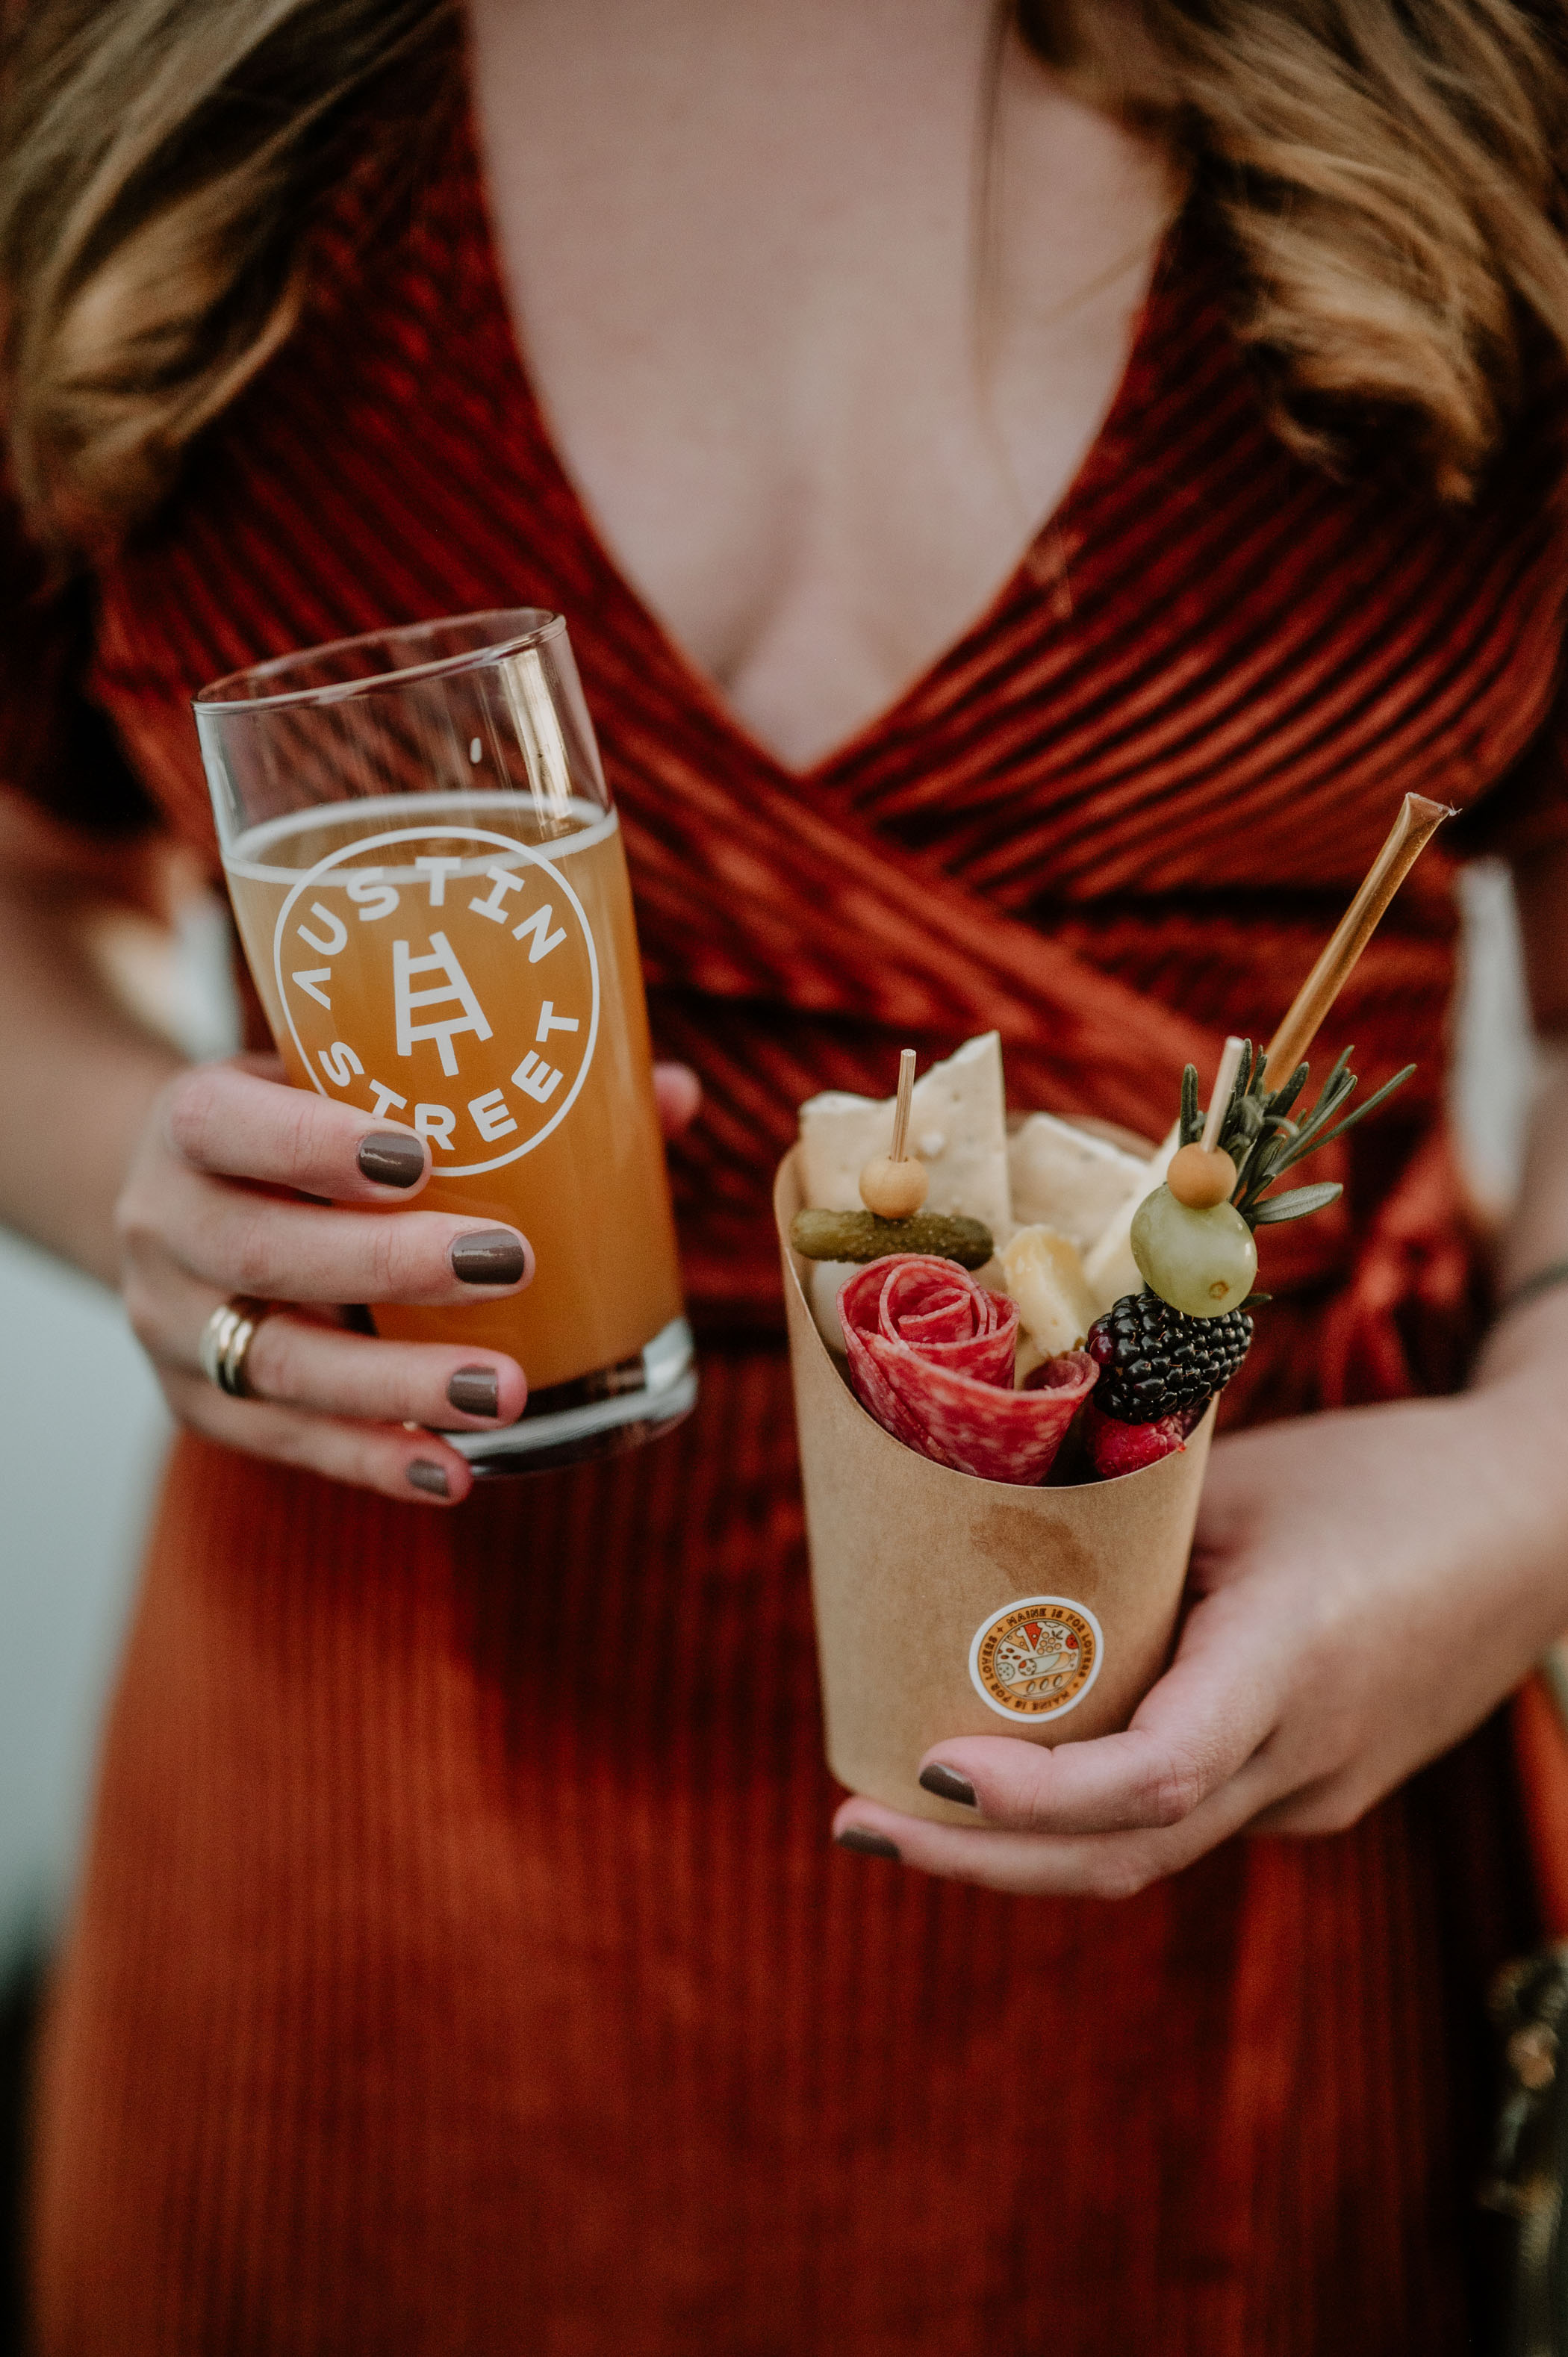 Maine is For Lovers: Funky Brewery Wedding in Portland Maine